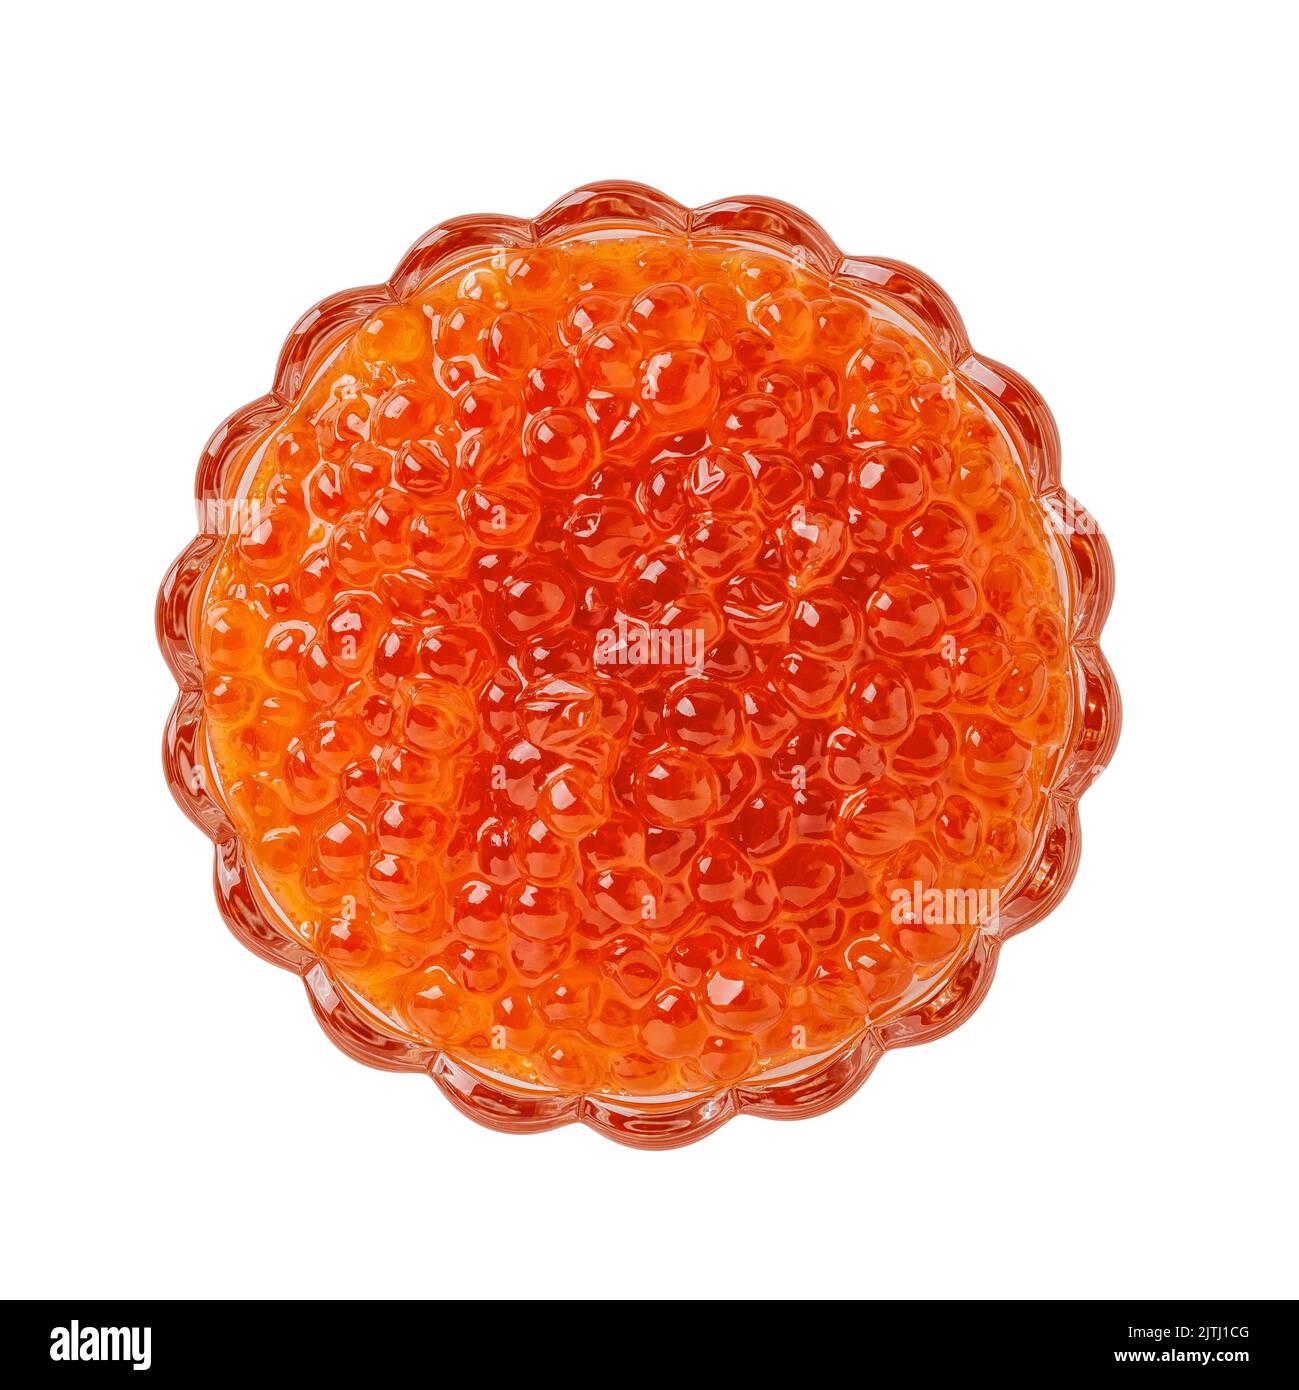 Red caviar in a glass bowl isolated on a white background. Crystal dish full of chum salmon caviar cutout. Salted trout roe. Seafood fish delicacy. Stock Photo